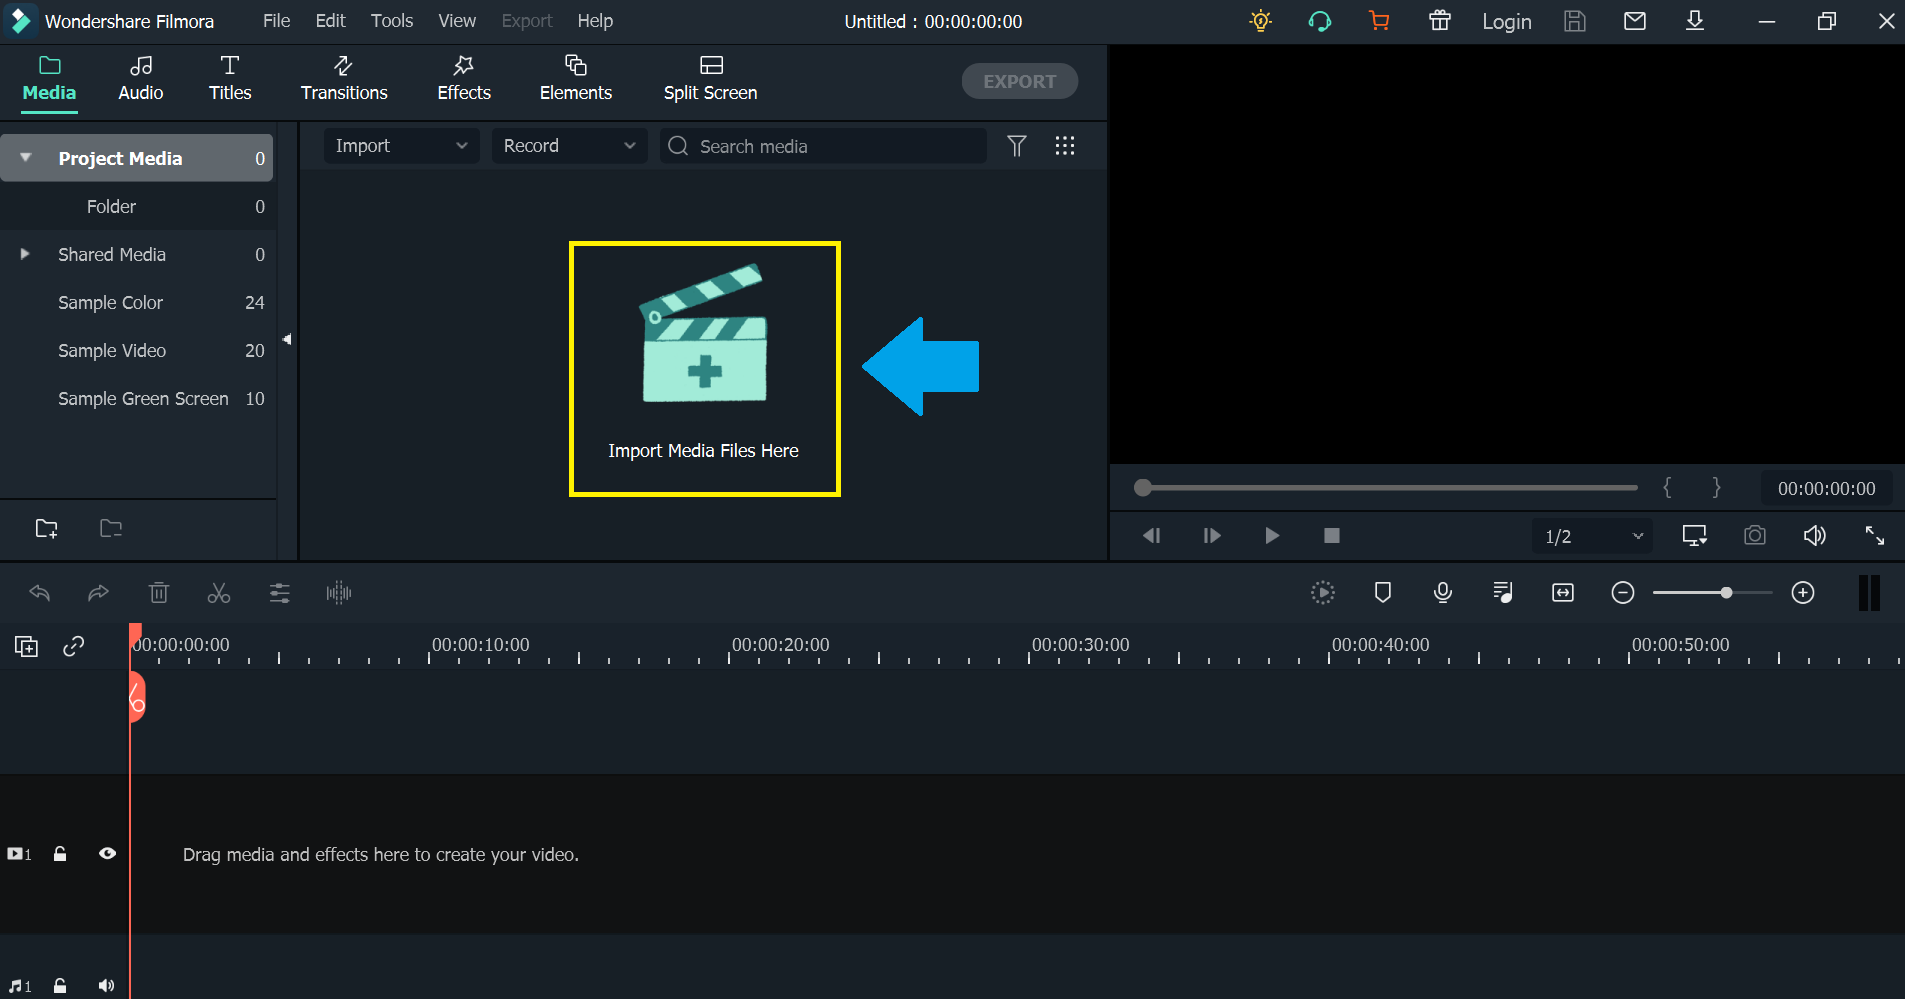 to import the video for editing, click on the “ + ” sign.